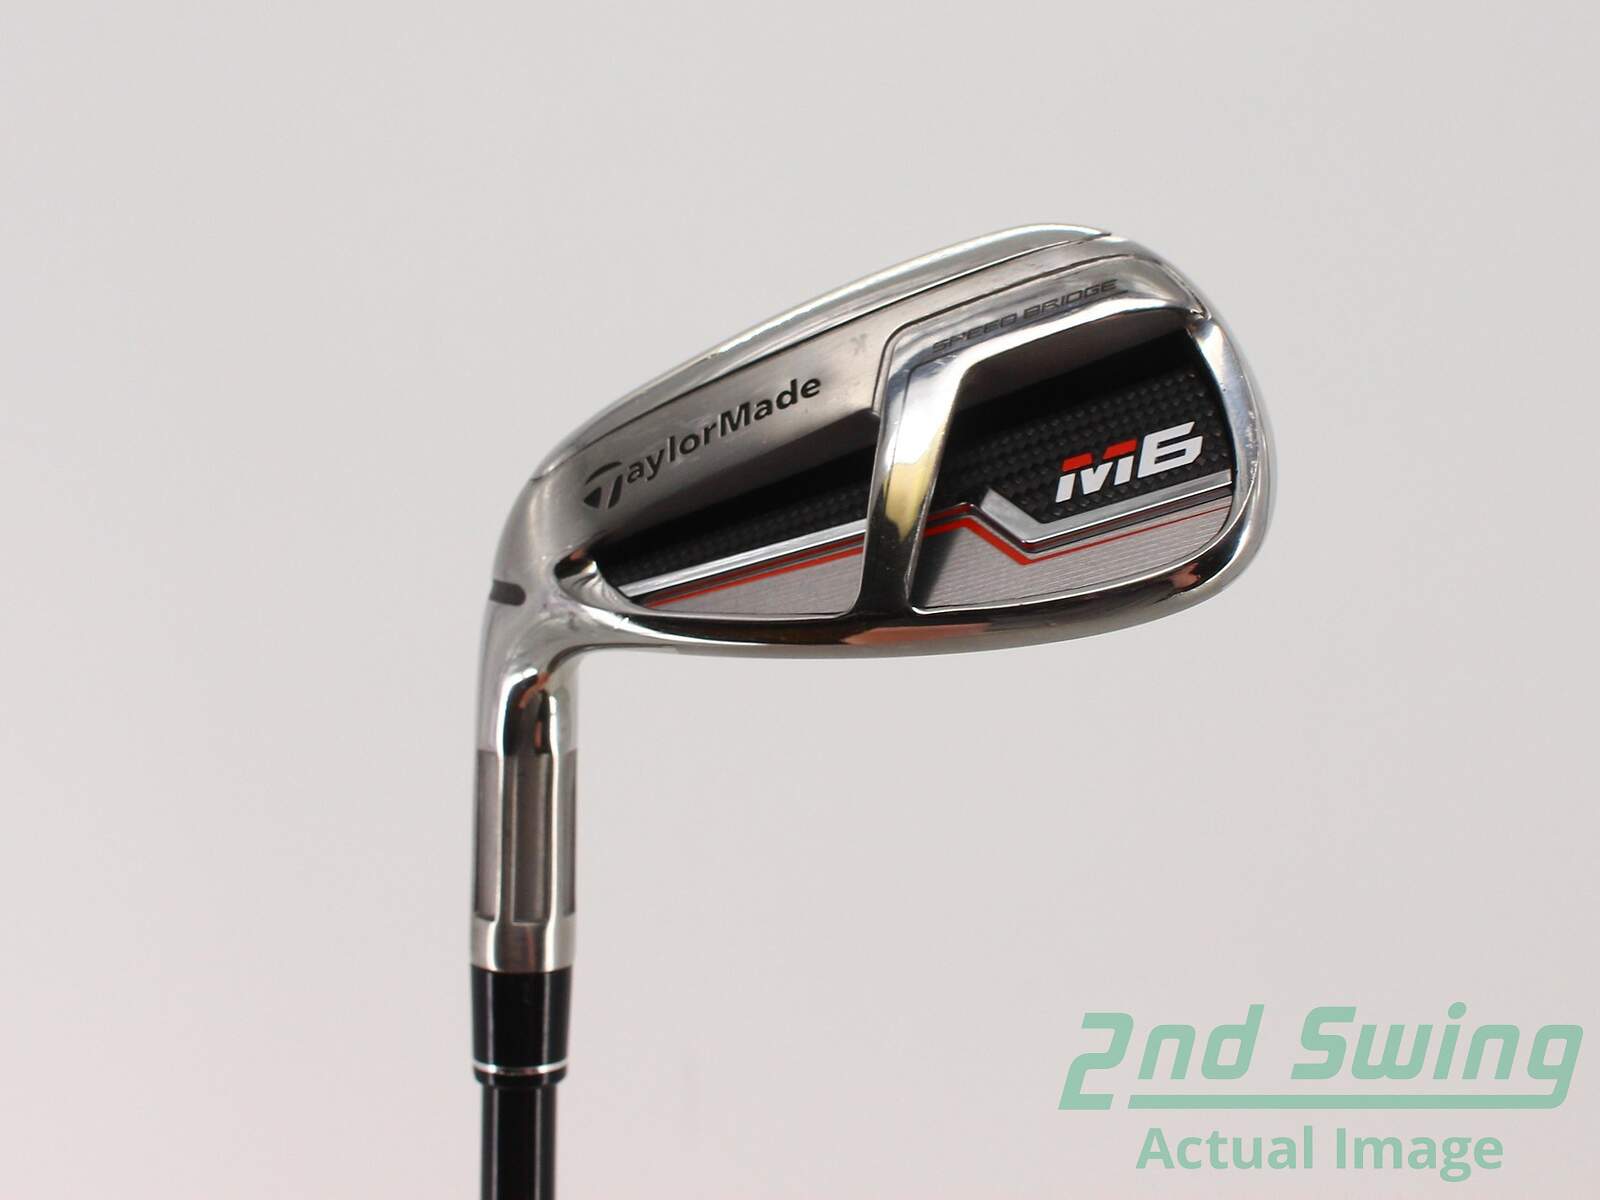 taylormade m6 approach wedge